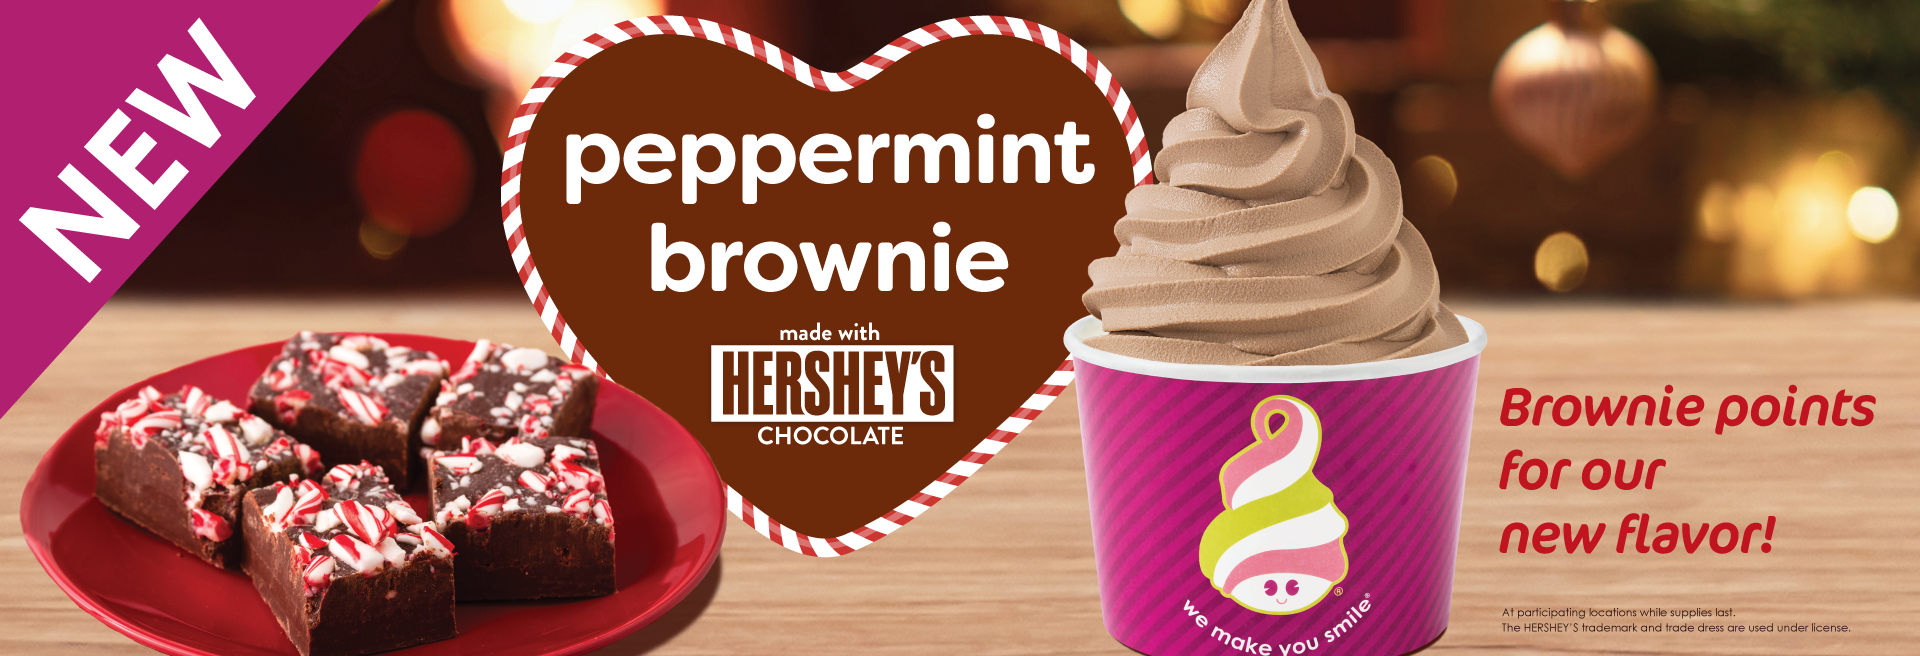 The most festive mix of peppermint, brownie, and Hershey’s Chocolate